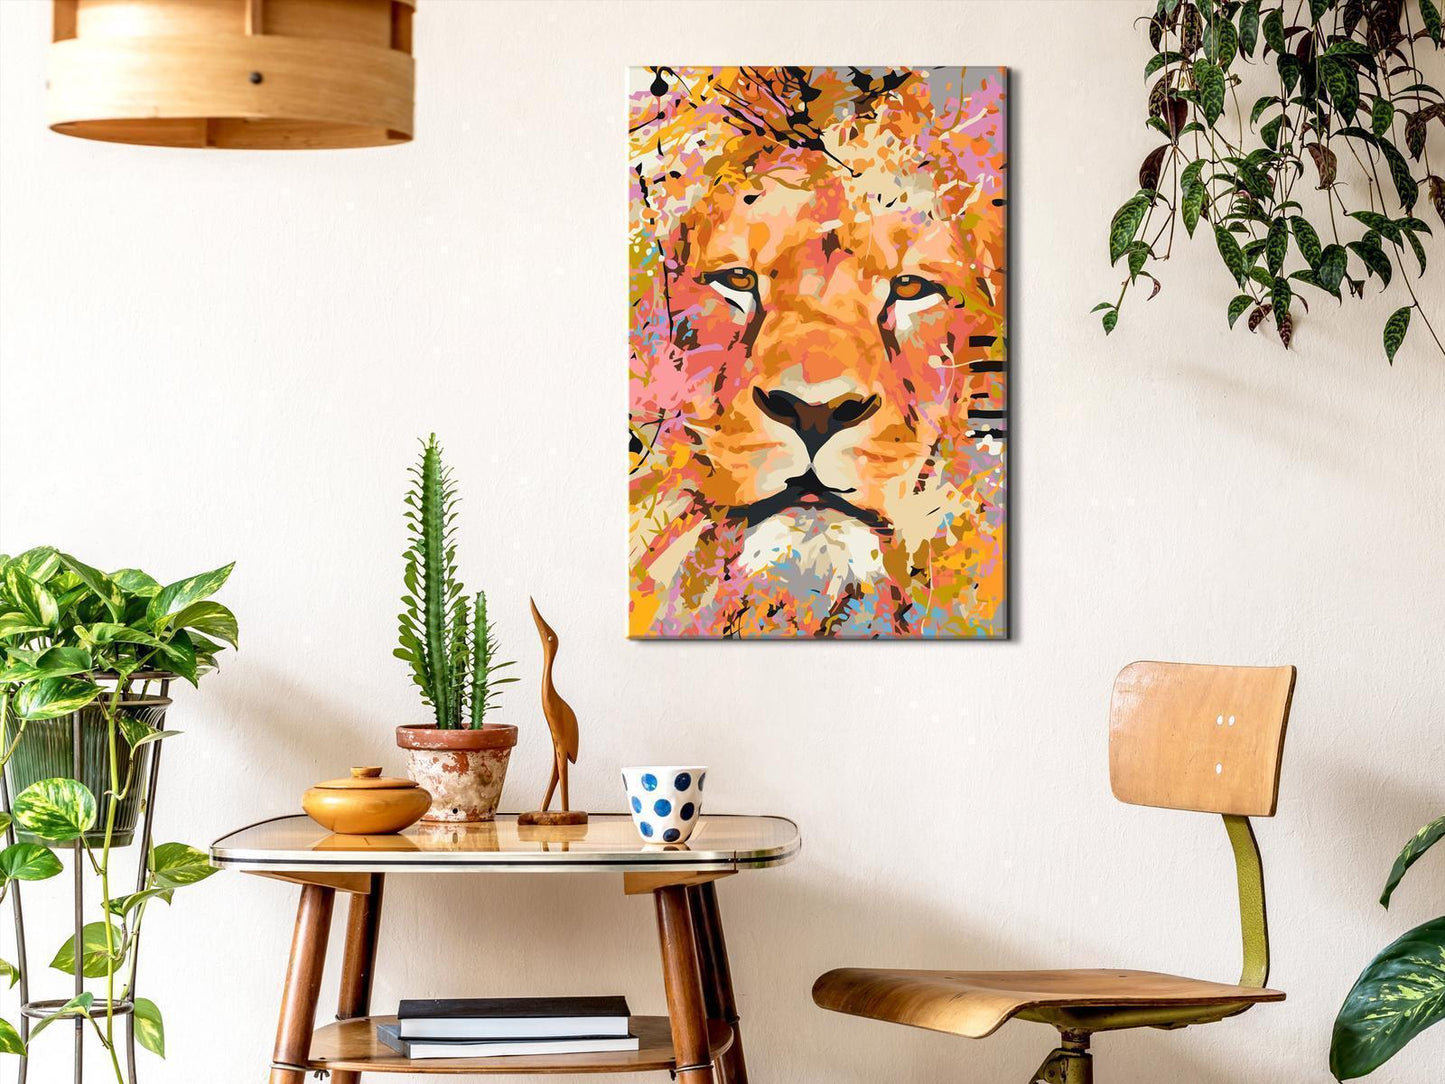 DIY Canvas Painting - Watchful Lion 